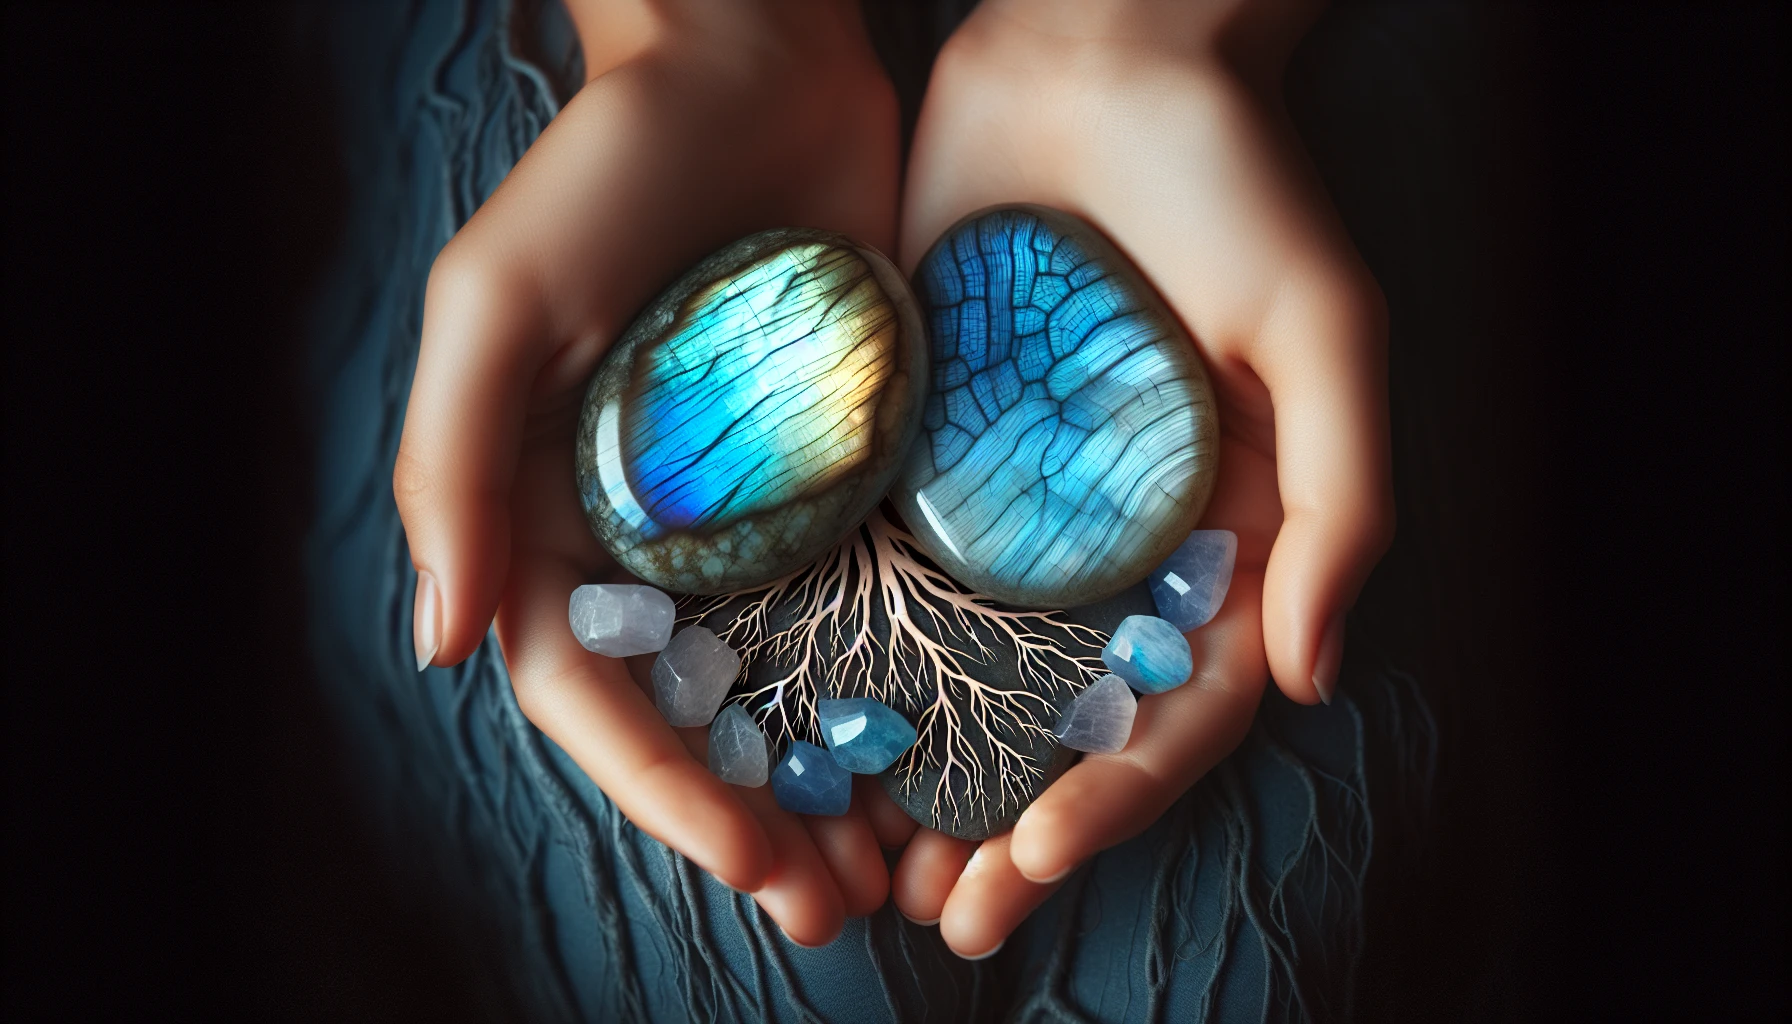 Illustration of Labradorite and Blue Lace Agate crystals